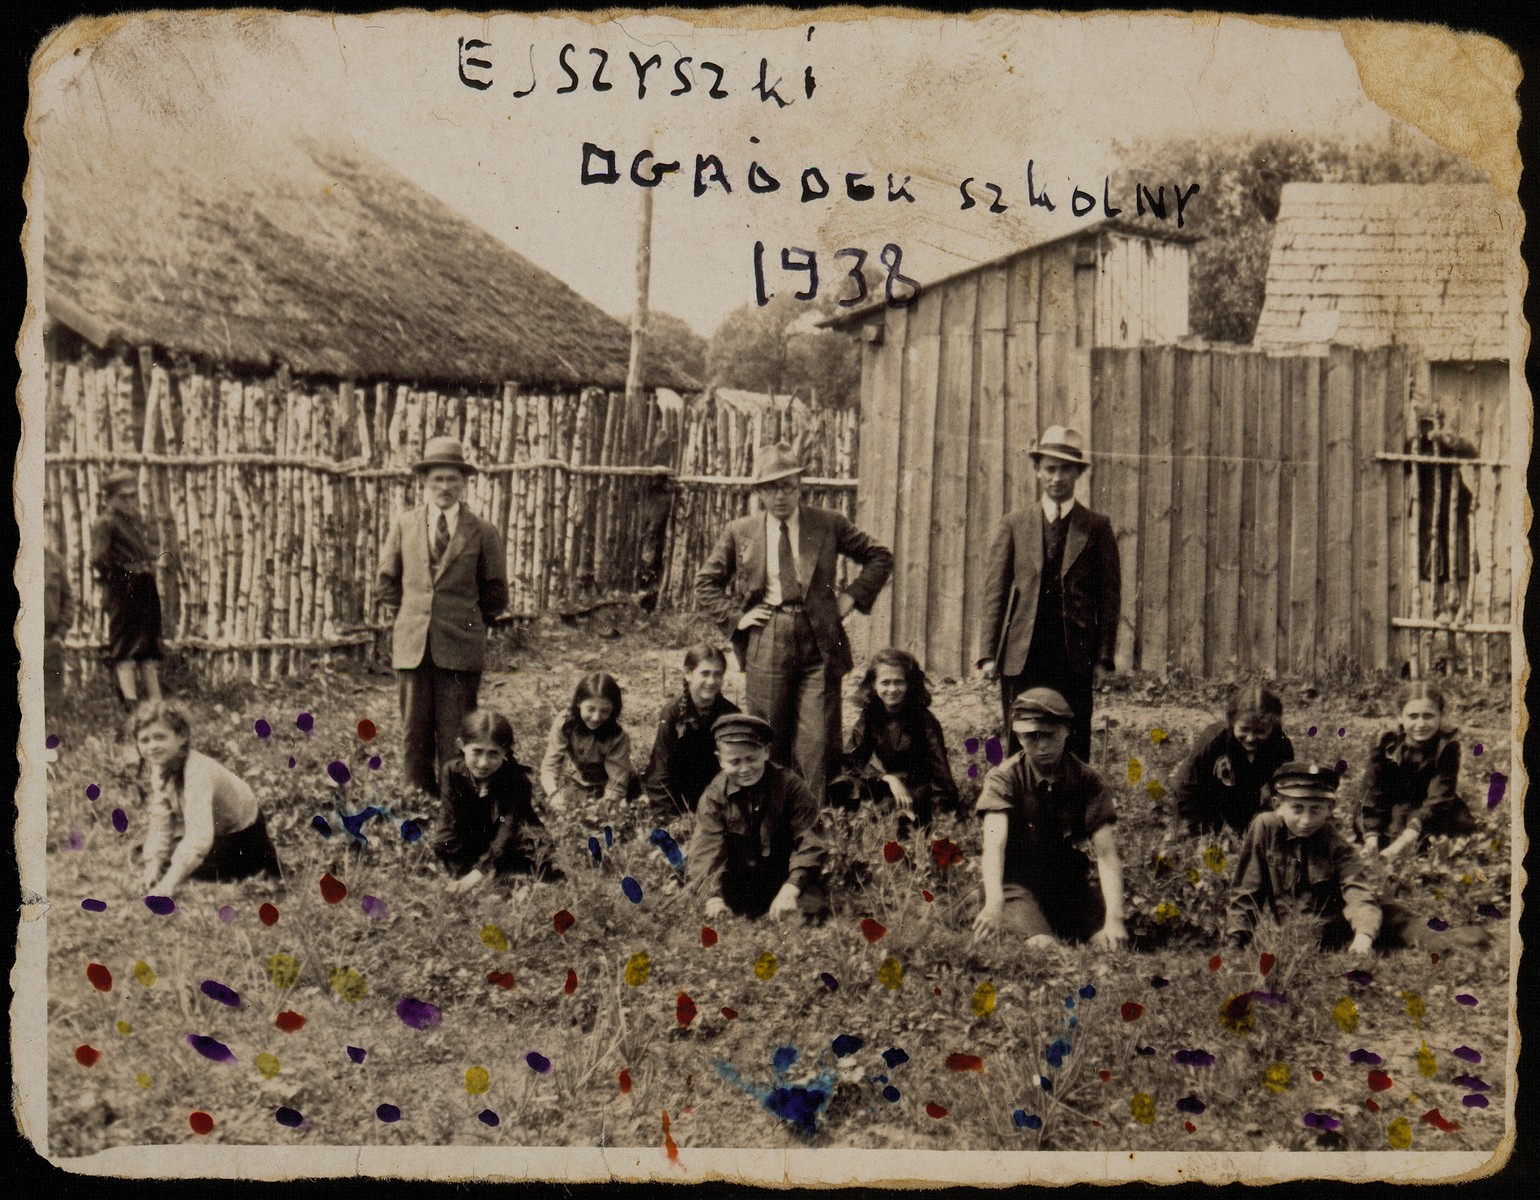 Children from the Hebrew School work in the school's garden in preparation for immigration to Palestine. 

Supervising them are three of their teachers: (right to left) a teacher from the shtetl of Belski, Mr. Okun, and Shaul Schneider (front row, right to left) Avigdor Katz, Moshe Kaplan, Elisha Koppelman, Sheinele Dwilanski; (back row, right to left) Hayya Shlanski, Rachel Koppelman, Leah Michalowski, (first name unknown) Zila, and a girl from the Narodowicz family.  

Hayya immigrated to America; Leah Michalowski was one of the girls raped by "White Jacket," the Gestapo commander of Eisiskes; Rachel was killed by the Polish Home Army; the others were murdered by the Germans during the September 1941 mass shooting action in Eisiskes.